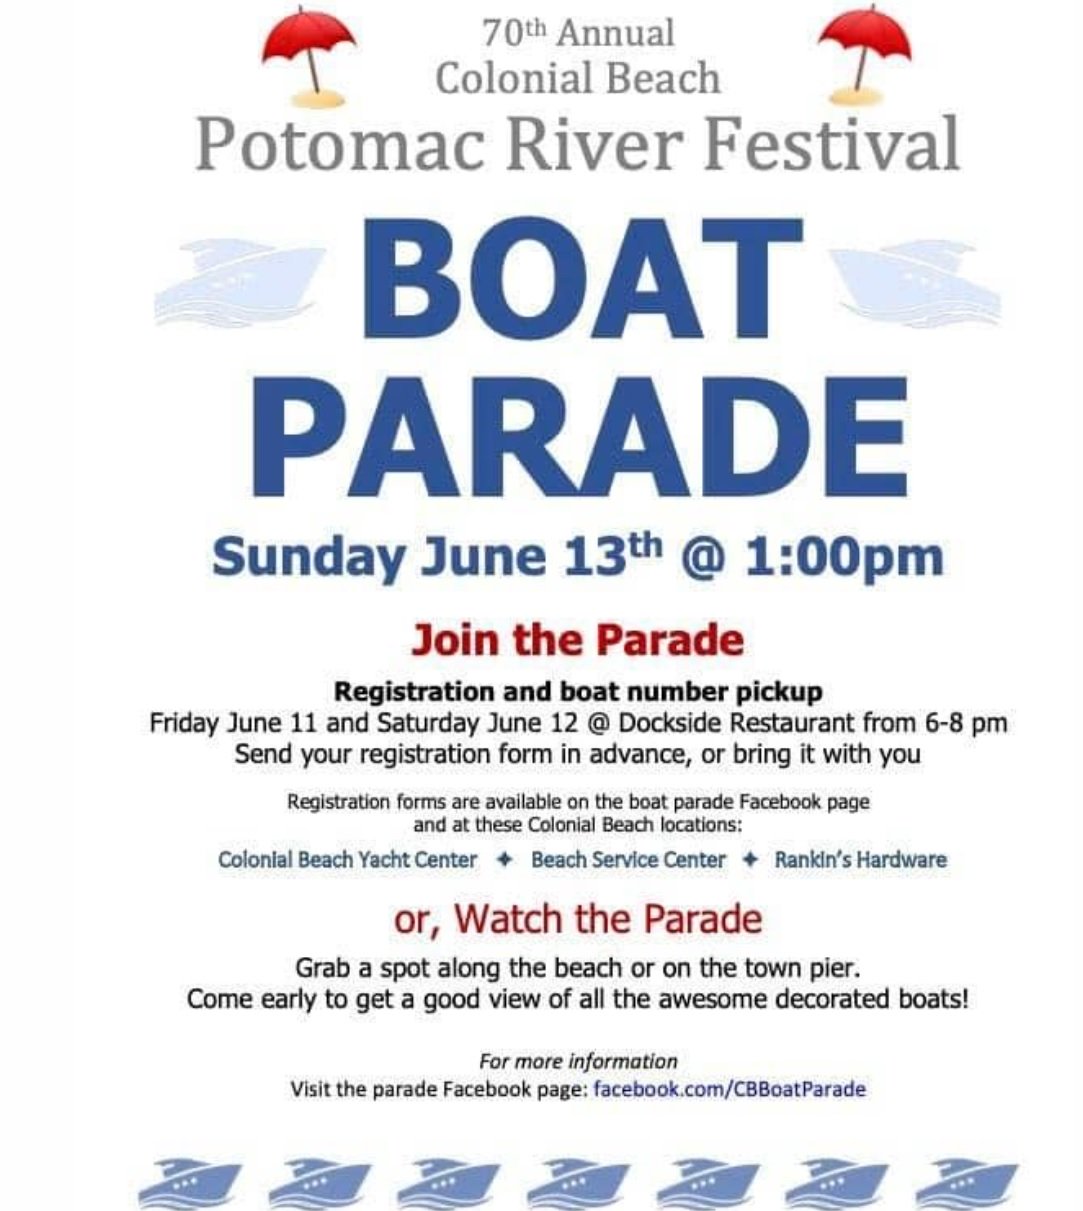 Boat parade flyer for 2021